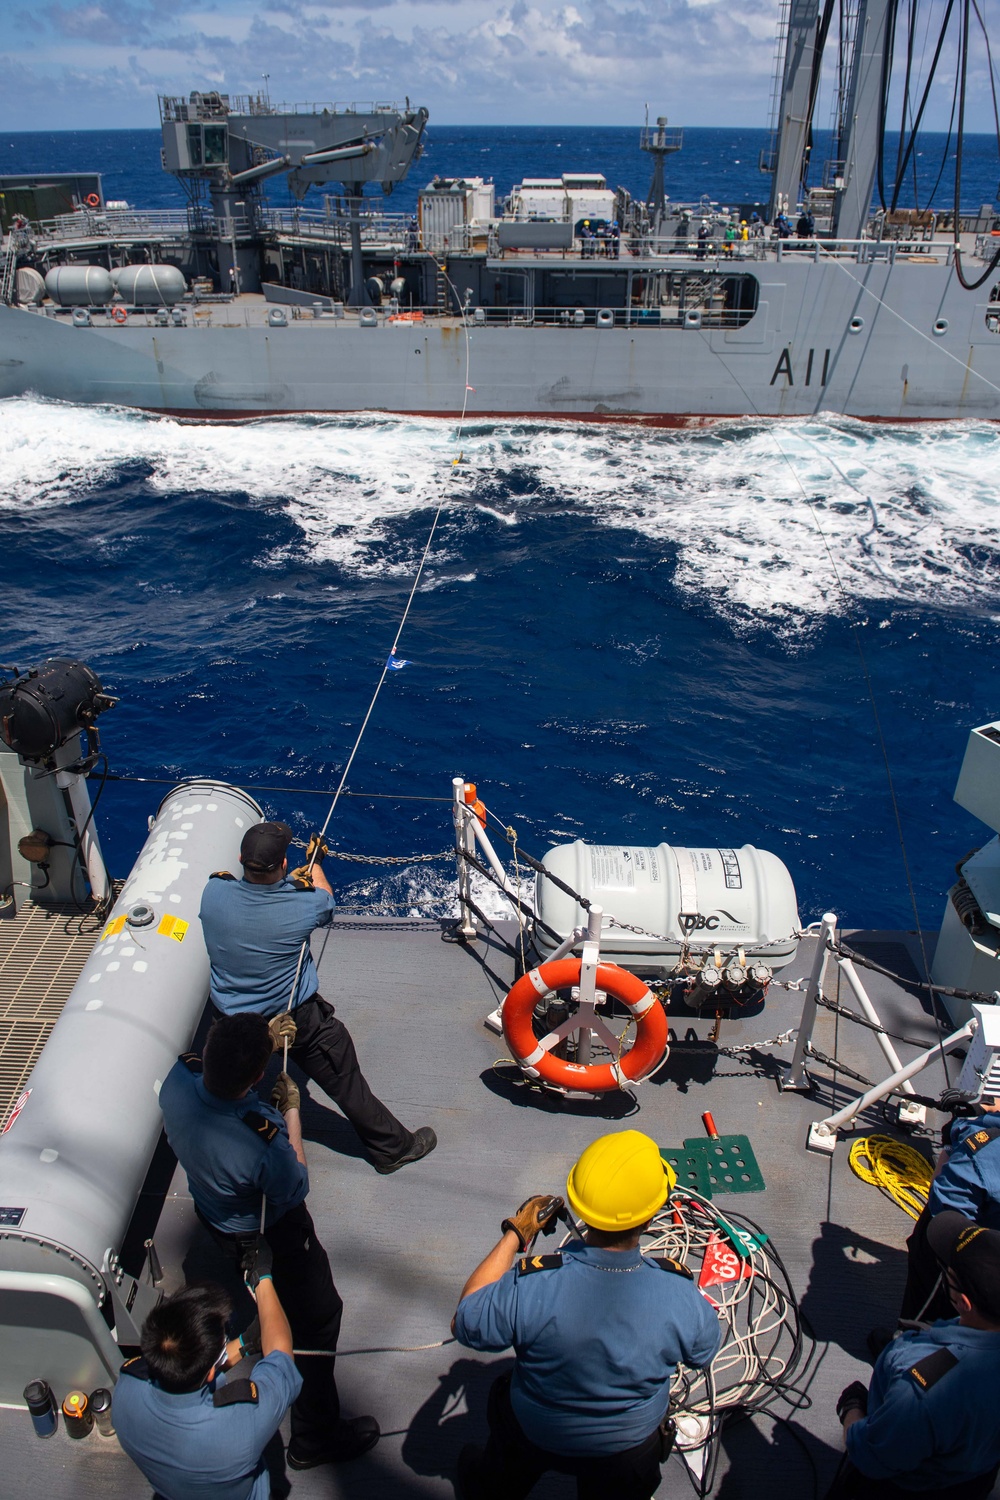 HMCS Vancouver conducts a RAS with HMNZS Aotearoa during RIMPAC 2022